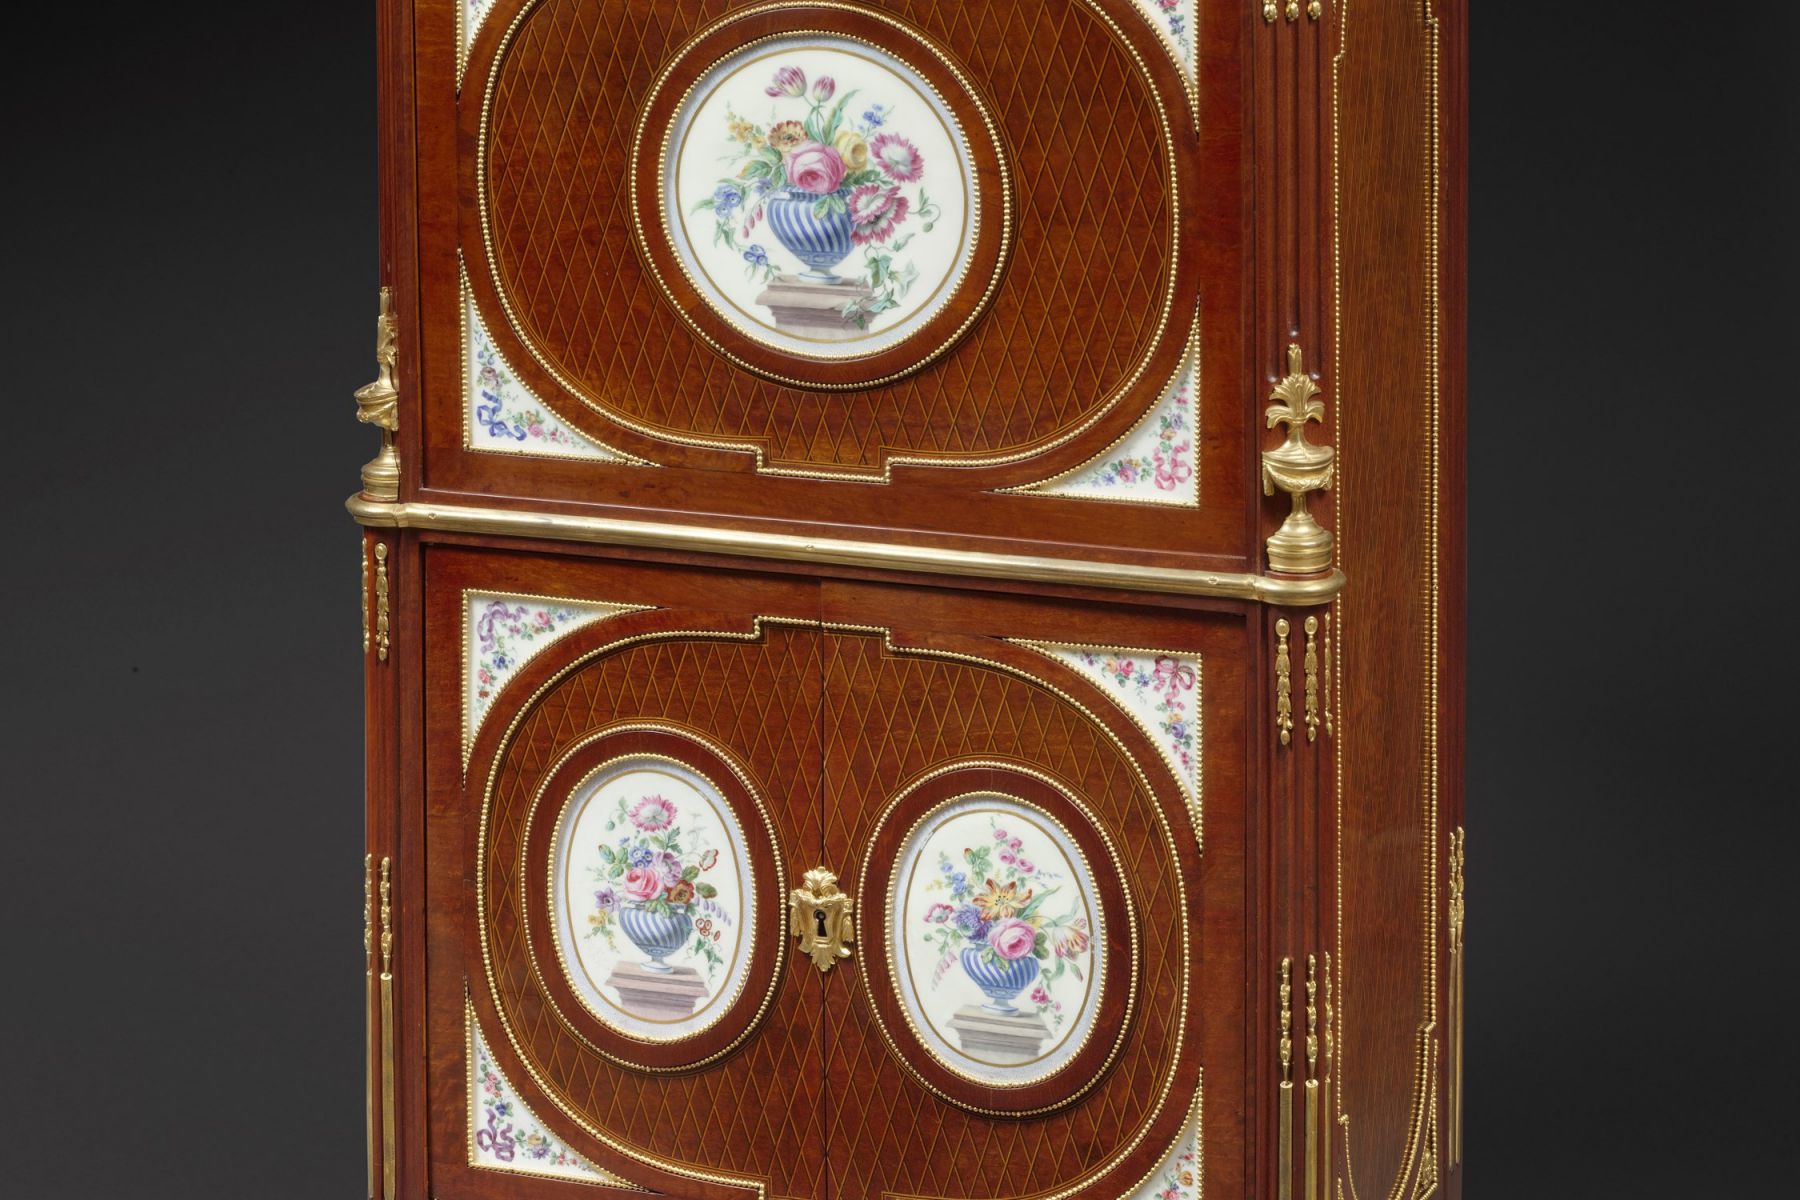 A Fine French ormolu and porcelain-mounted mahogany secrétaire à abattant